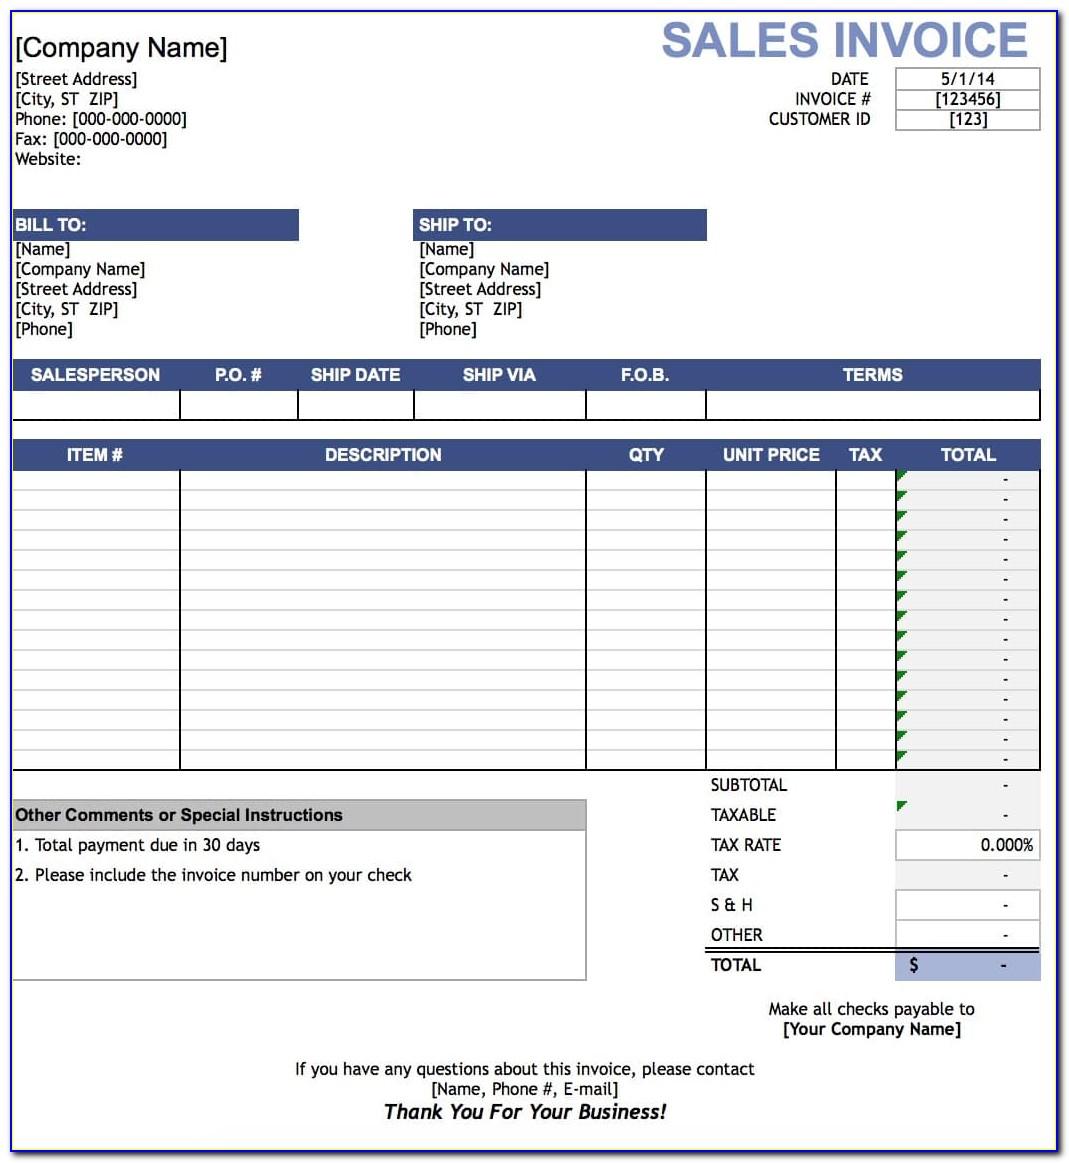 Sales Invoice Template Uk Excel